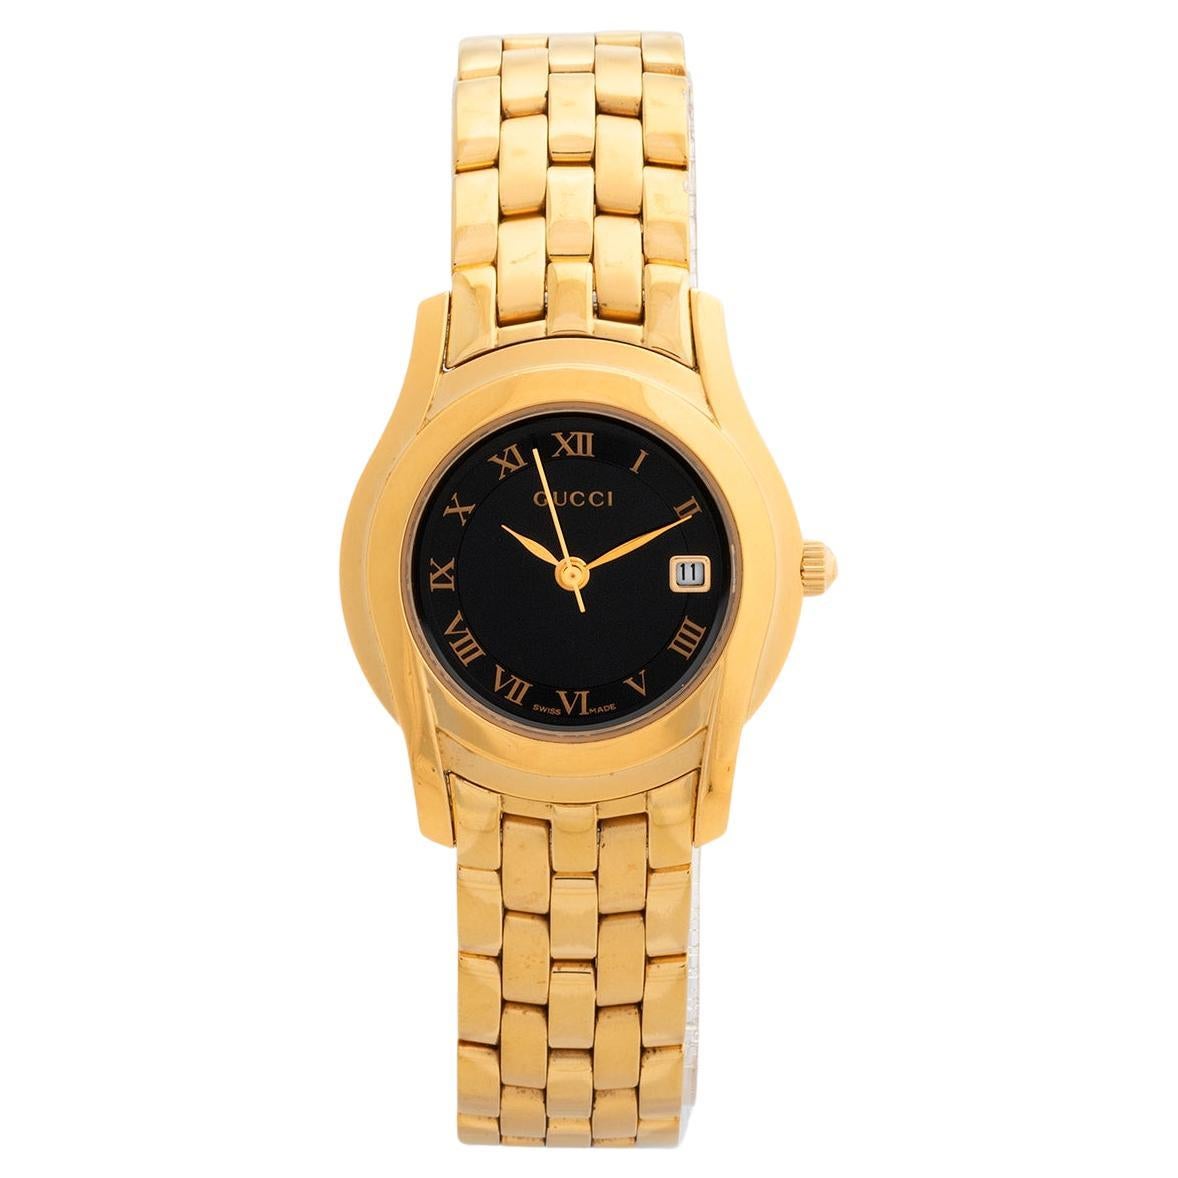 1990's Iconic Gucci 5400L Wristwatch. Heavy Gold Plated. Up to 150mm Wrist. For Sale